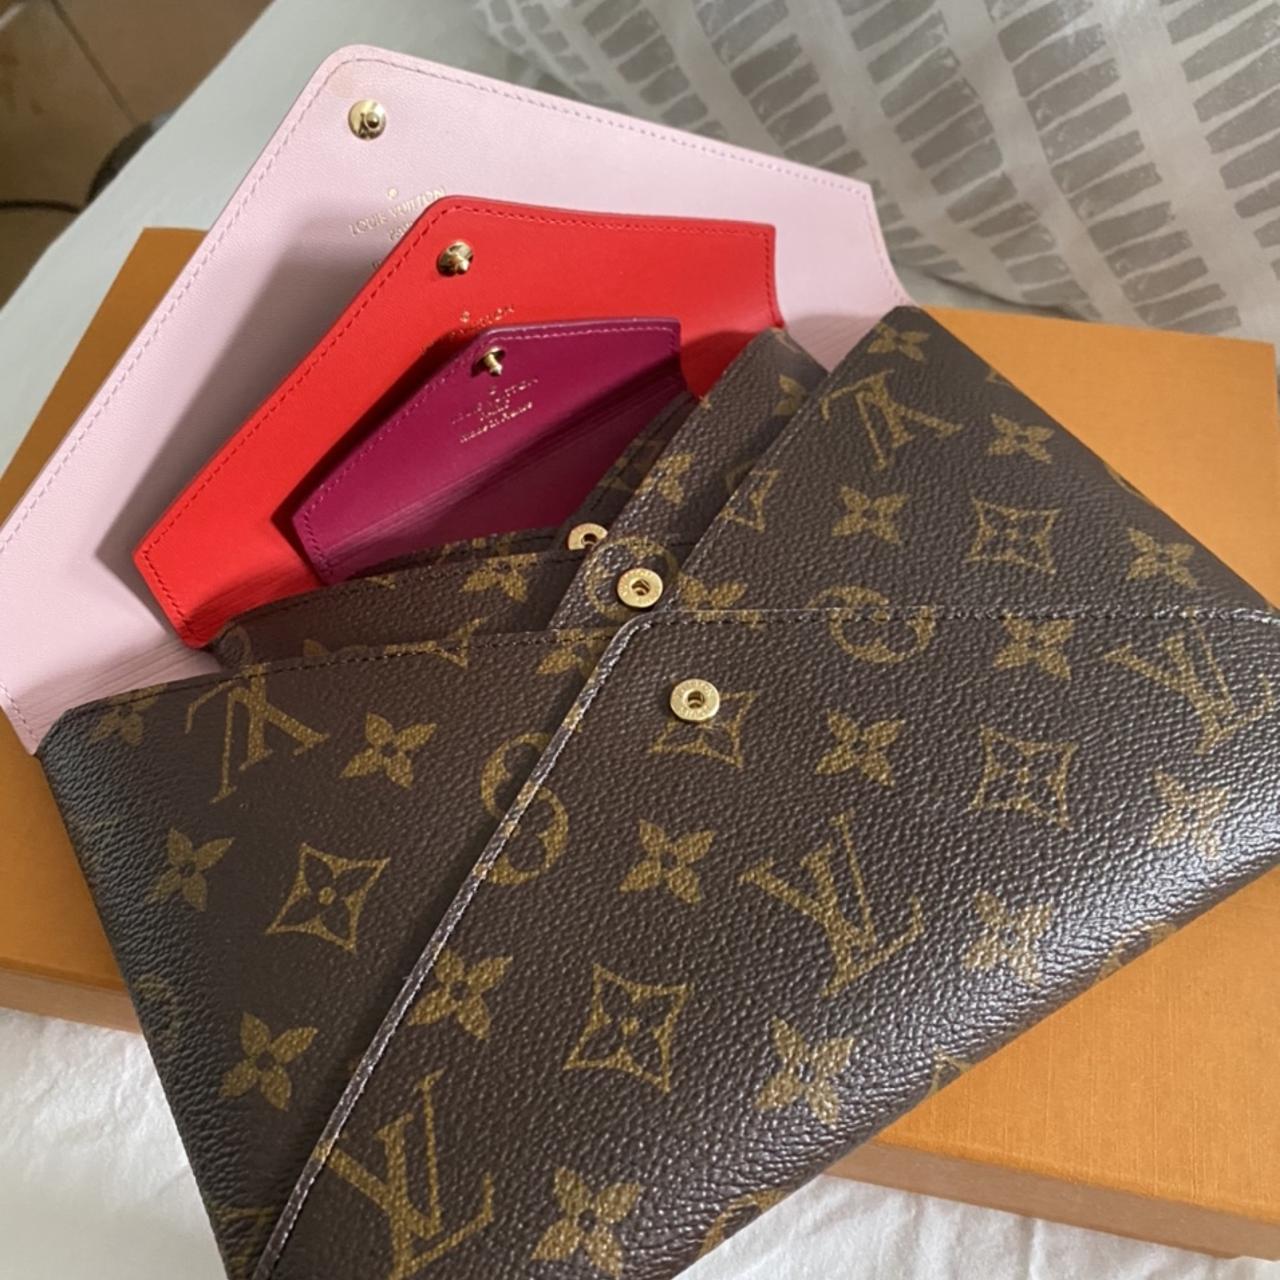 Louis Vuitton Kirigami Pochette from Spring in the - Depop